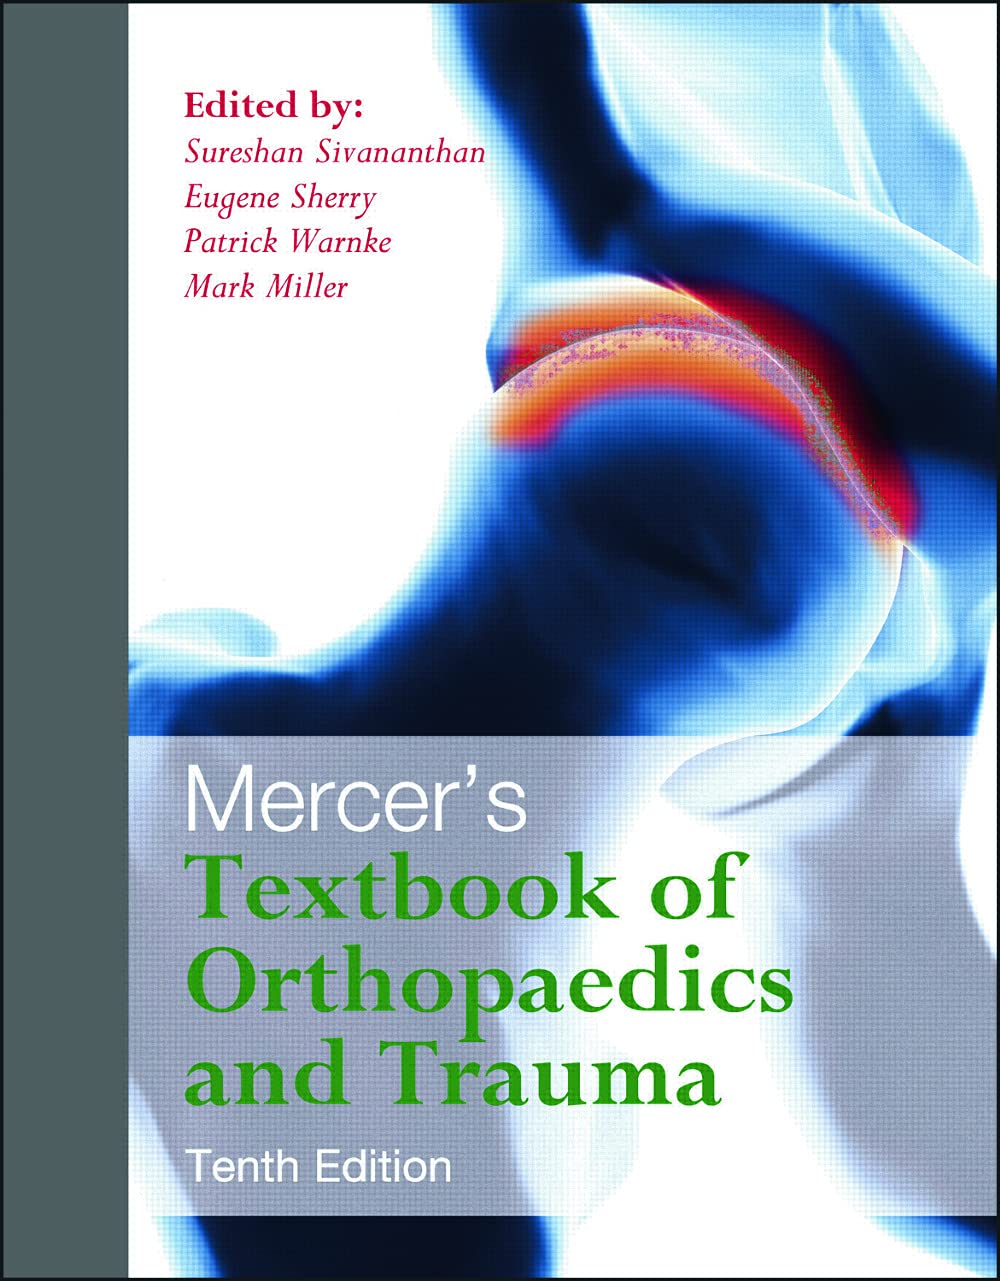 (EBook PDF)Mercer s Textbook of Orthopaedics and Trauma Tenth edition by Suresh Sivananthan, Eugene Sherry, Patrick Warnke, Mark Miller